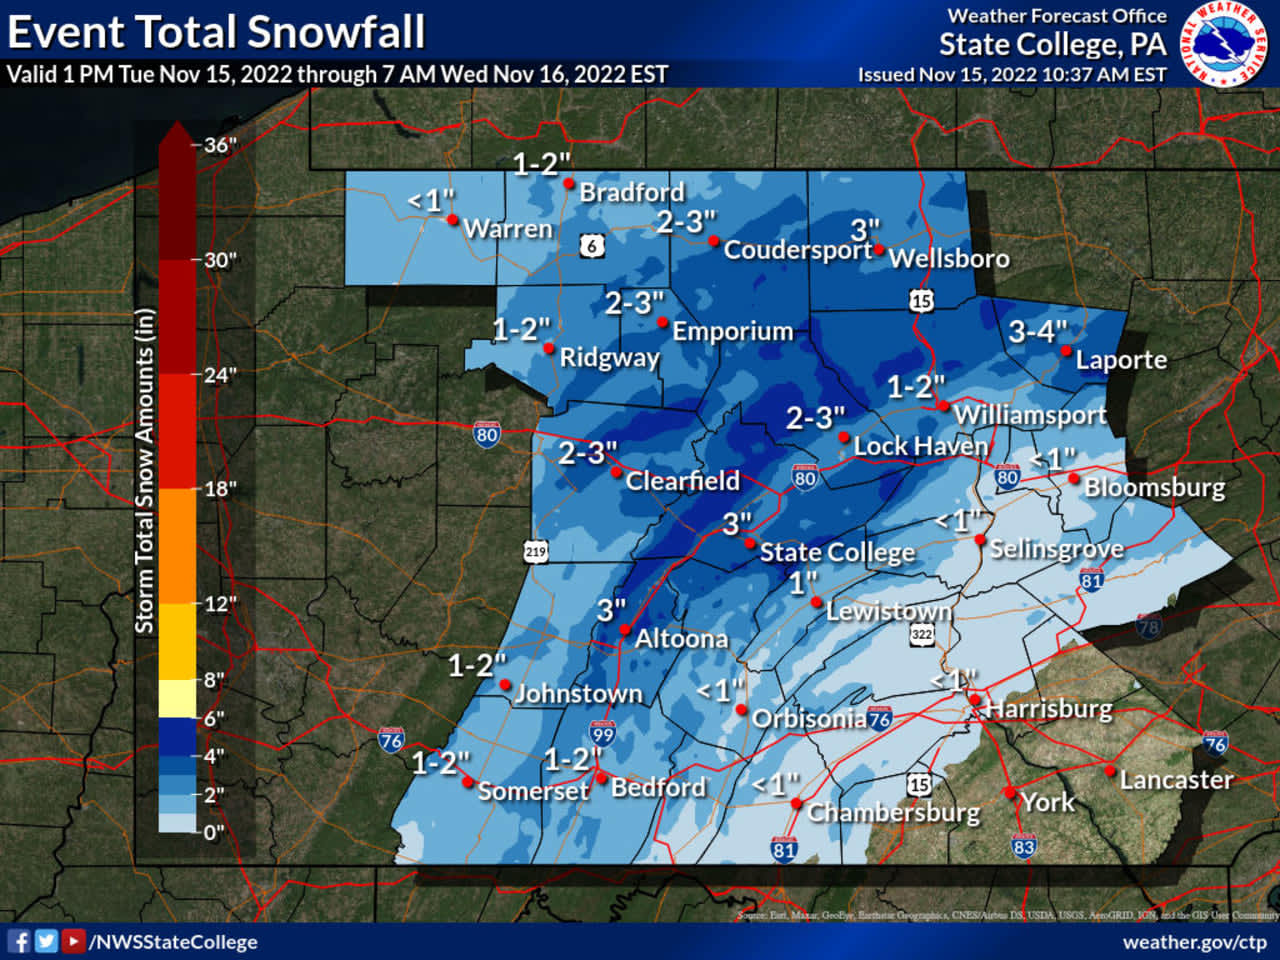 A National Weather Service map showing the snow and Ice fall estimates for Nov. 15, 2022.